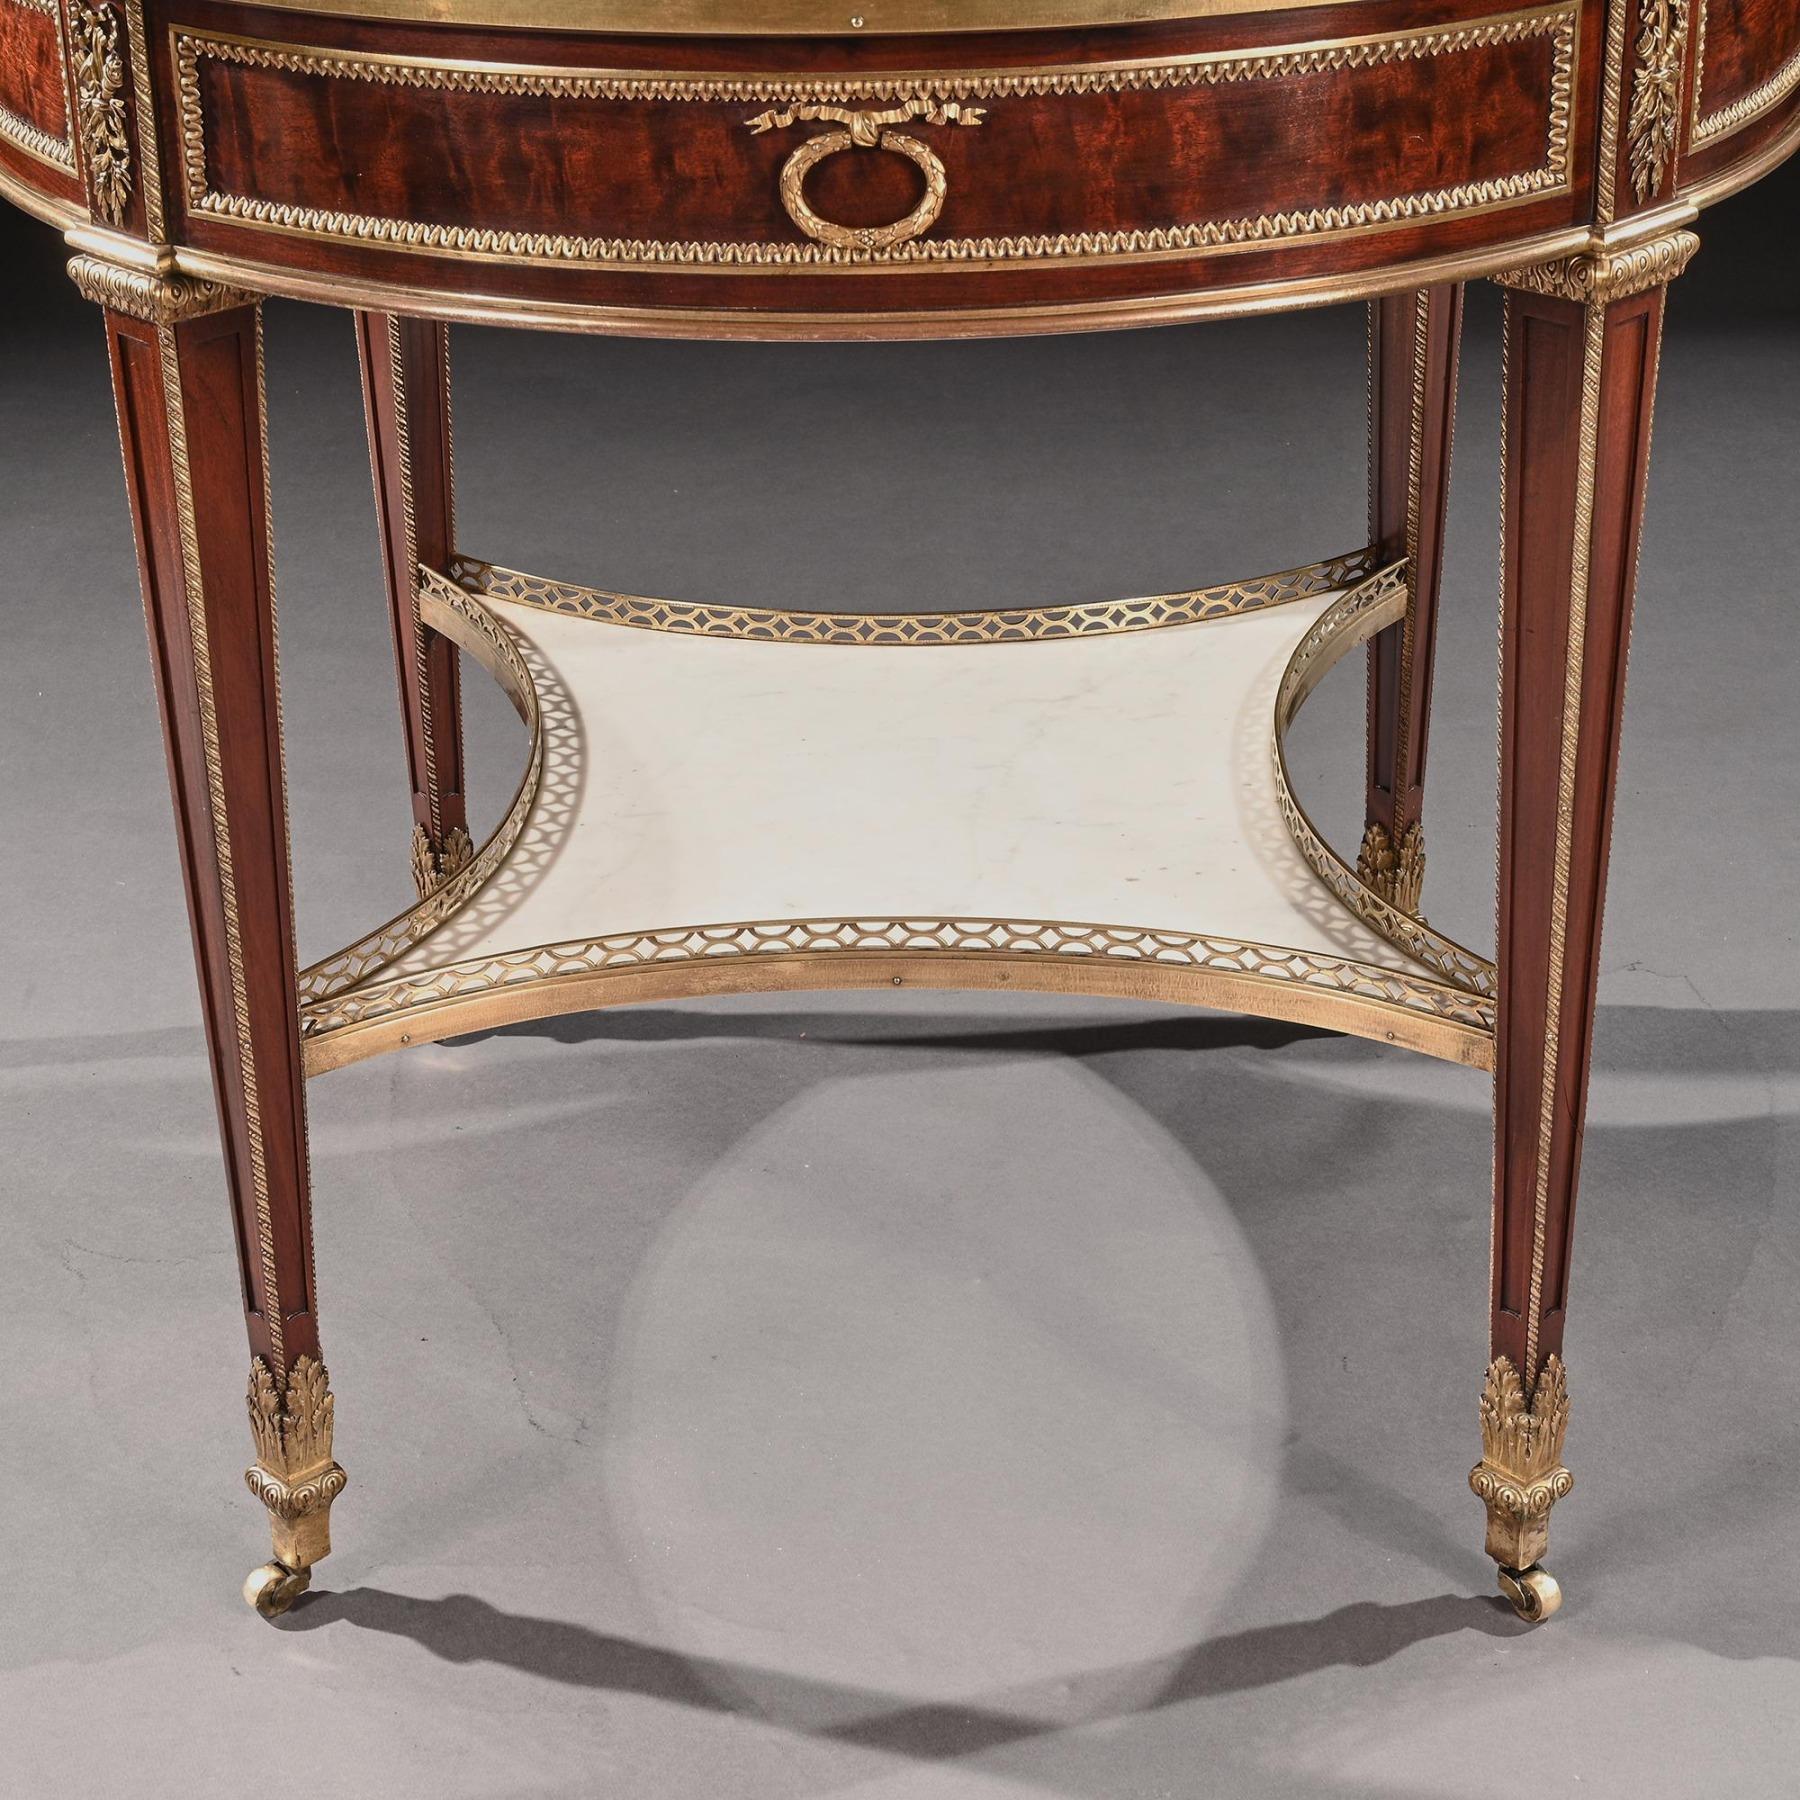 Exceptional G. Durand 19th C. Mahogany & Gilt Bronze Gueridon Bouillotte Table 10